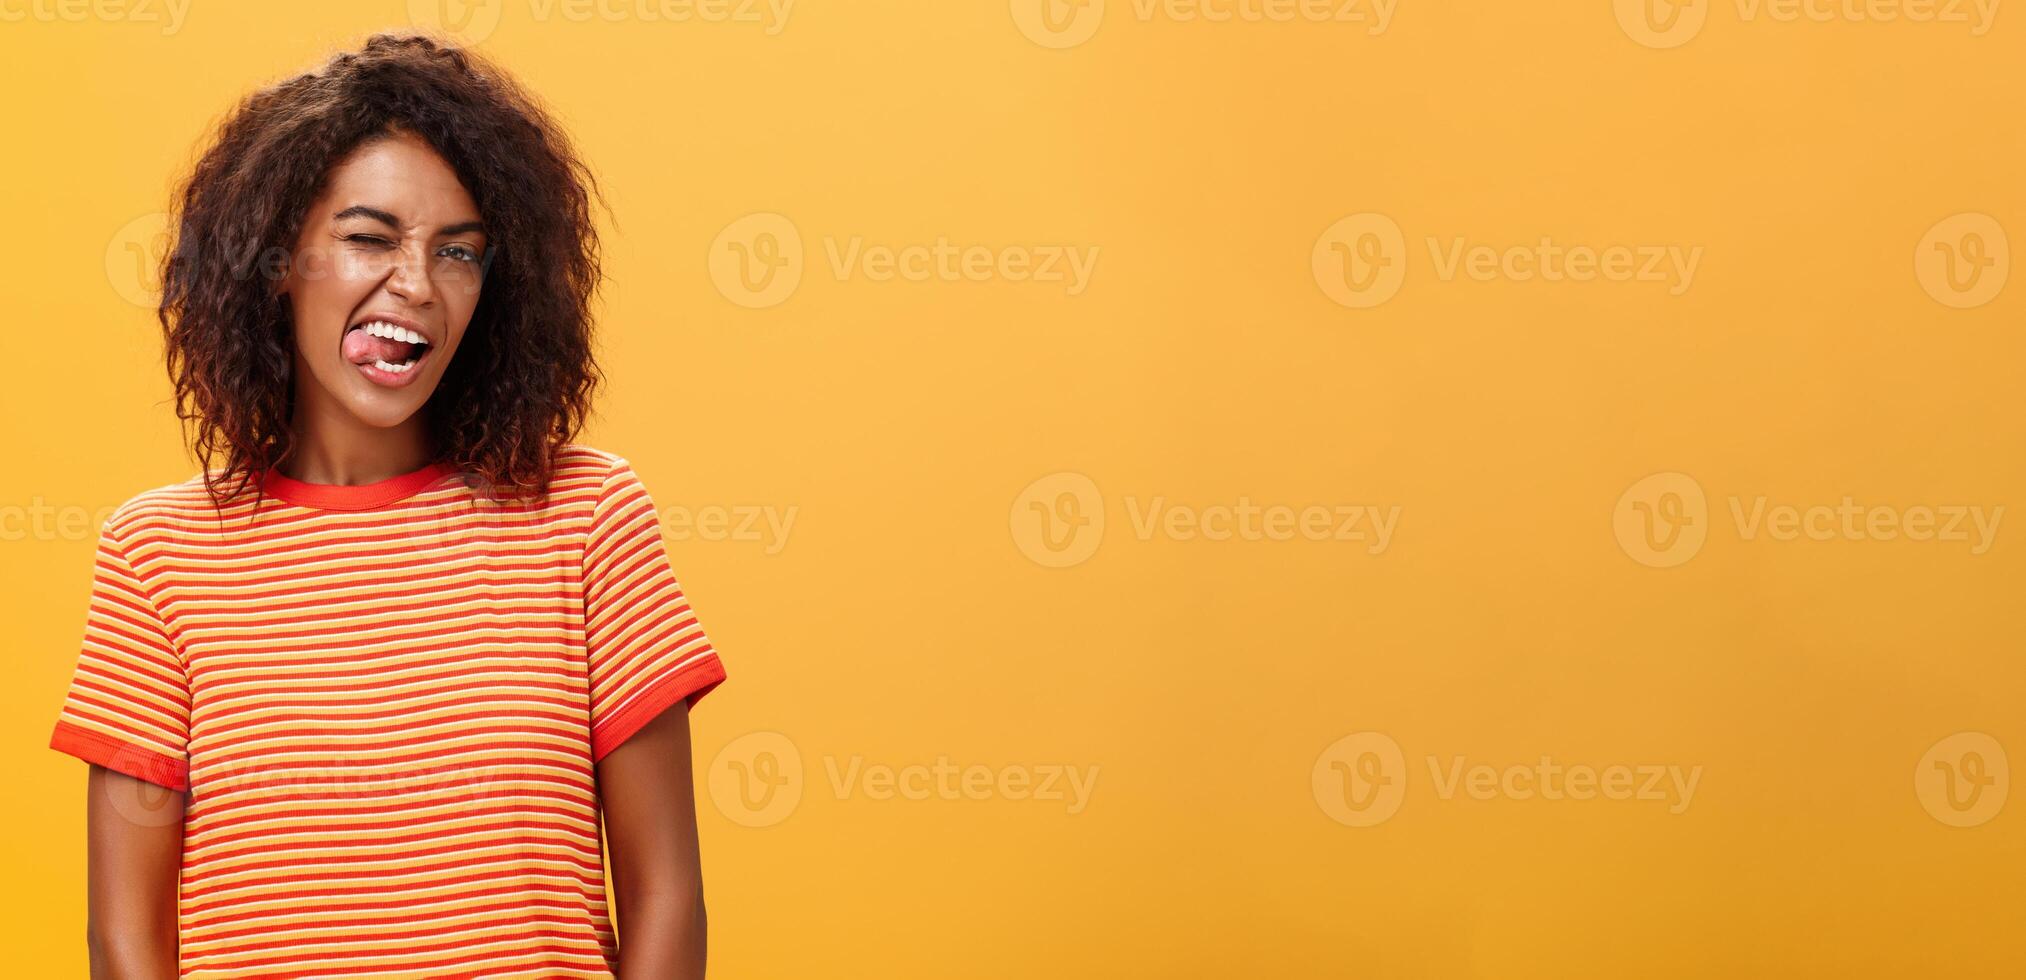 Portrait of daring and emotive confident flirty woman with afro hairstyle winking joyfully showing tongue posing carefree and enthusiastic against orange background flirting with hot guy photo